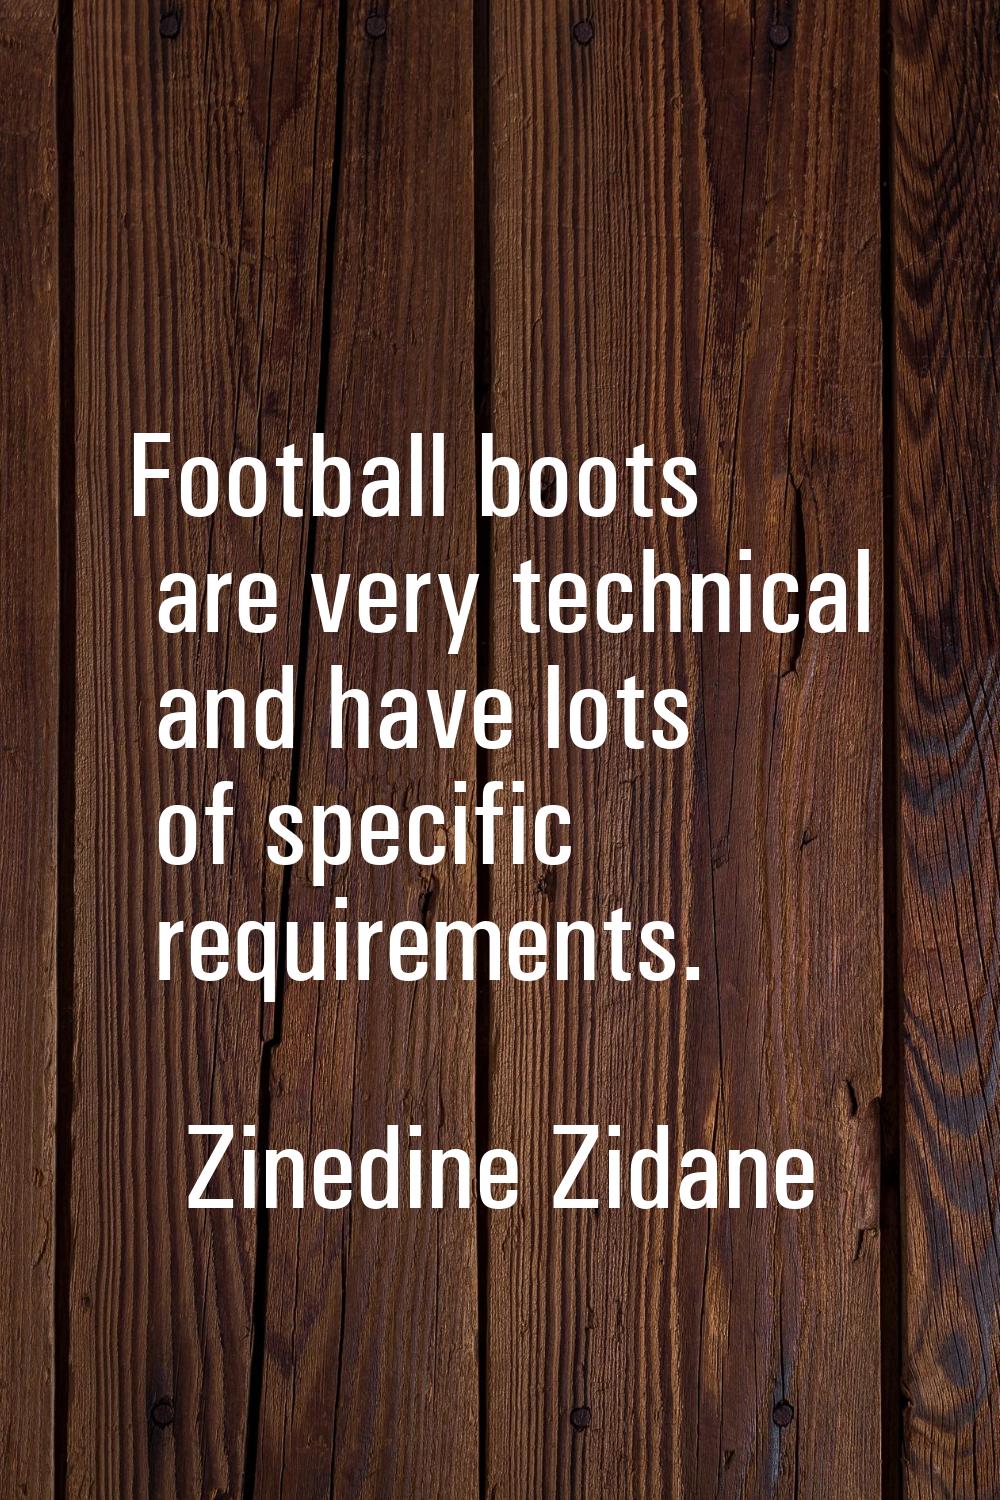 Football boots are very technical and have lots of specific requirements.